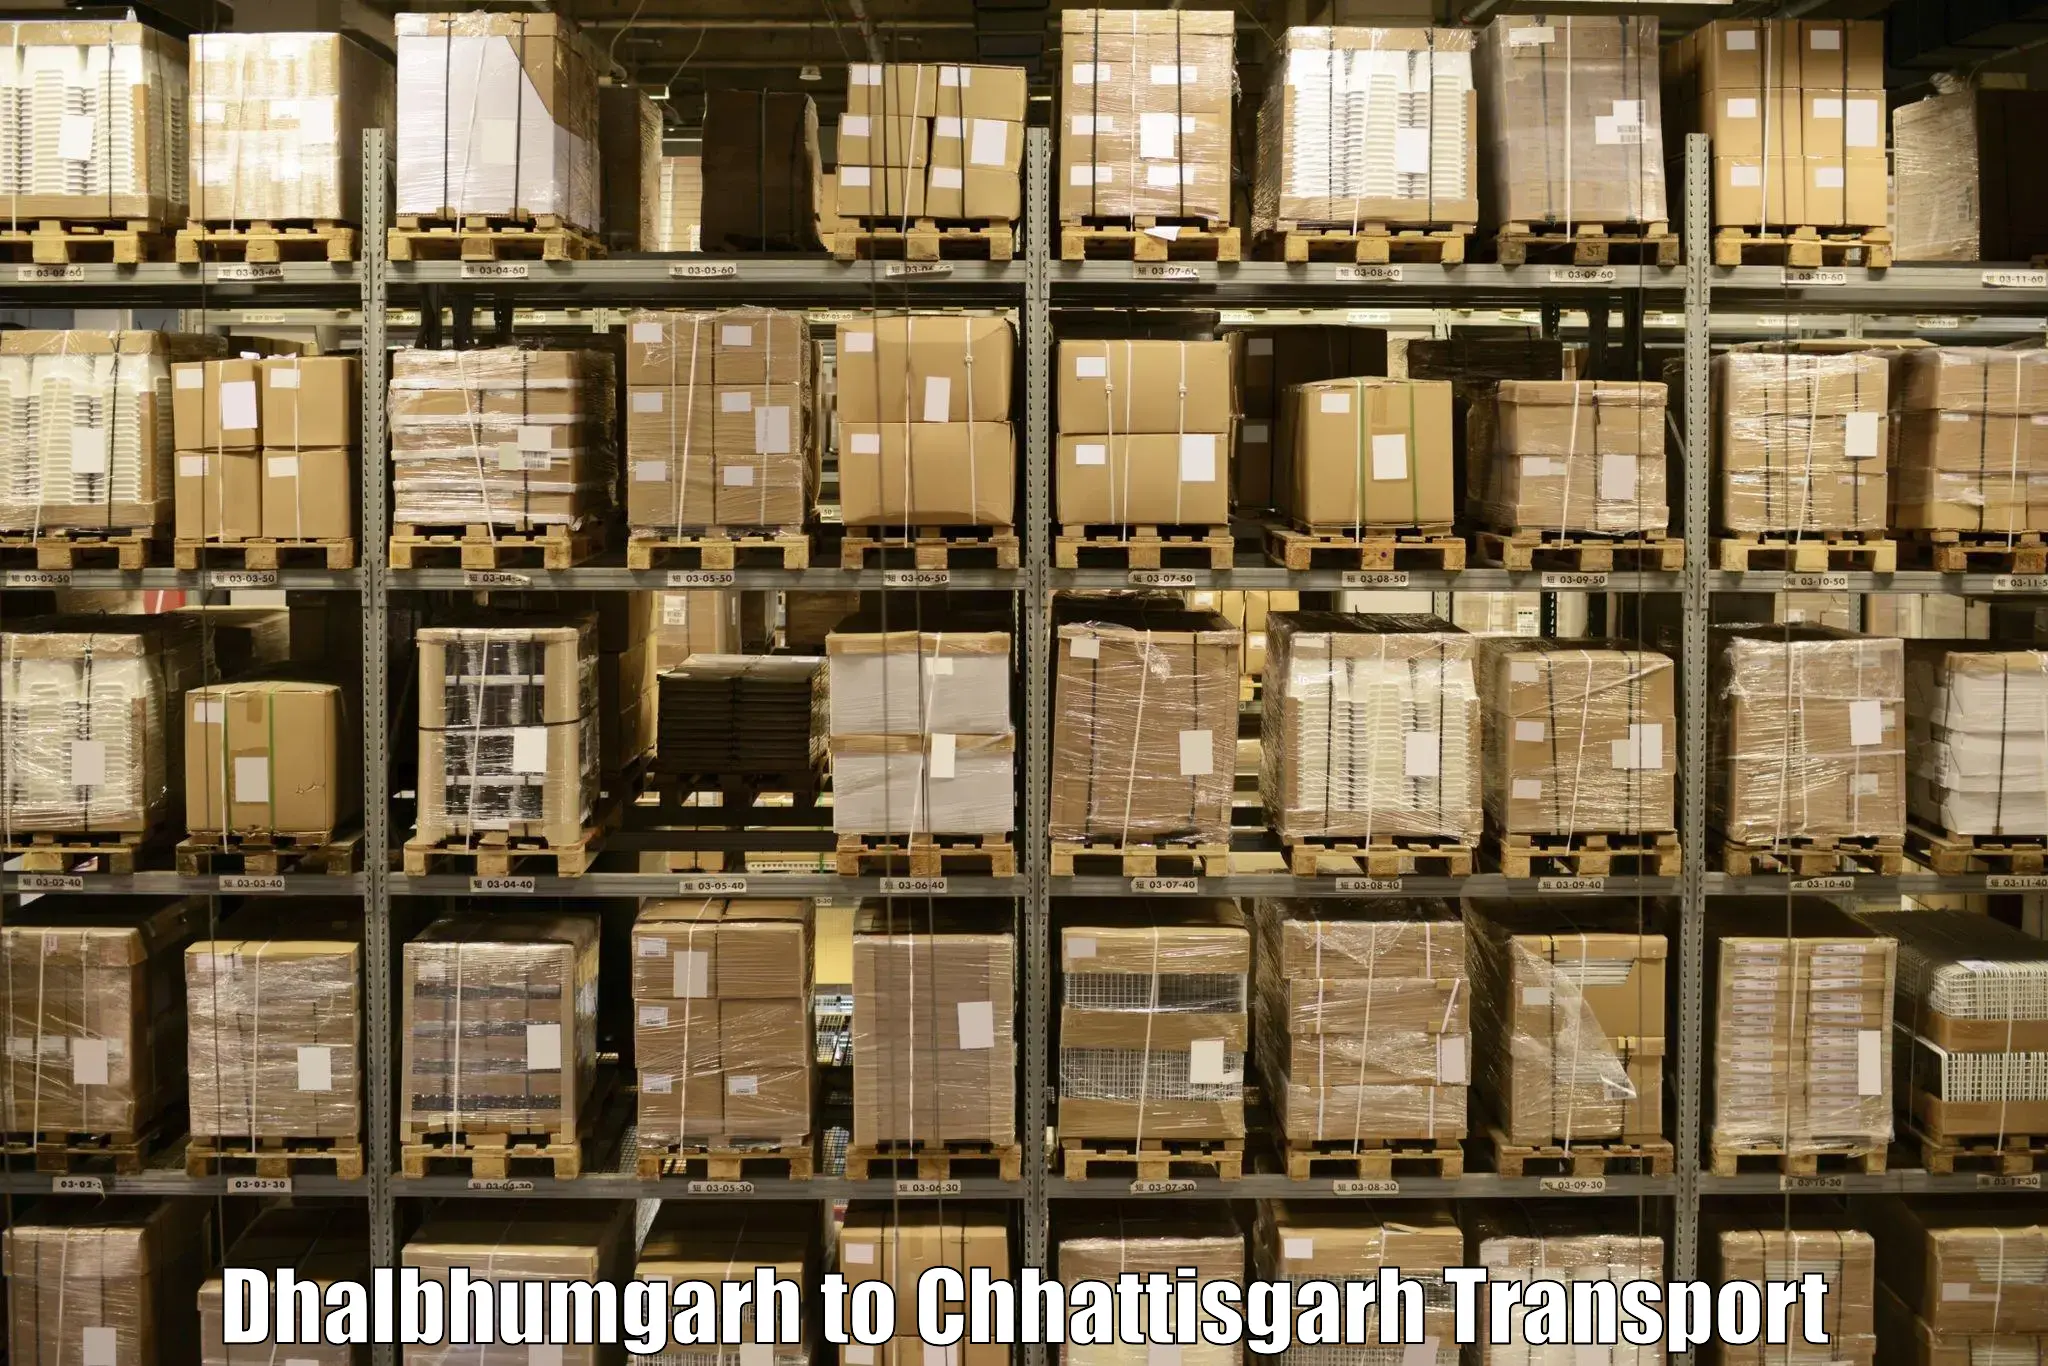 Road transport online services in Dhalbhumgarh to Rajnandgaon